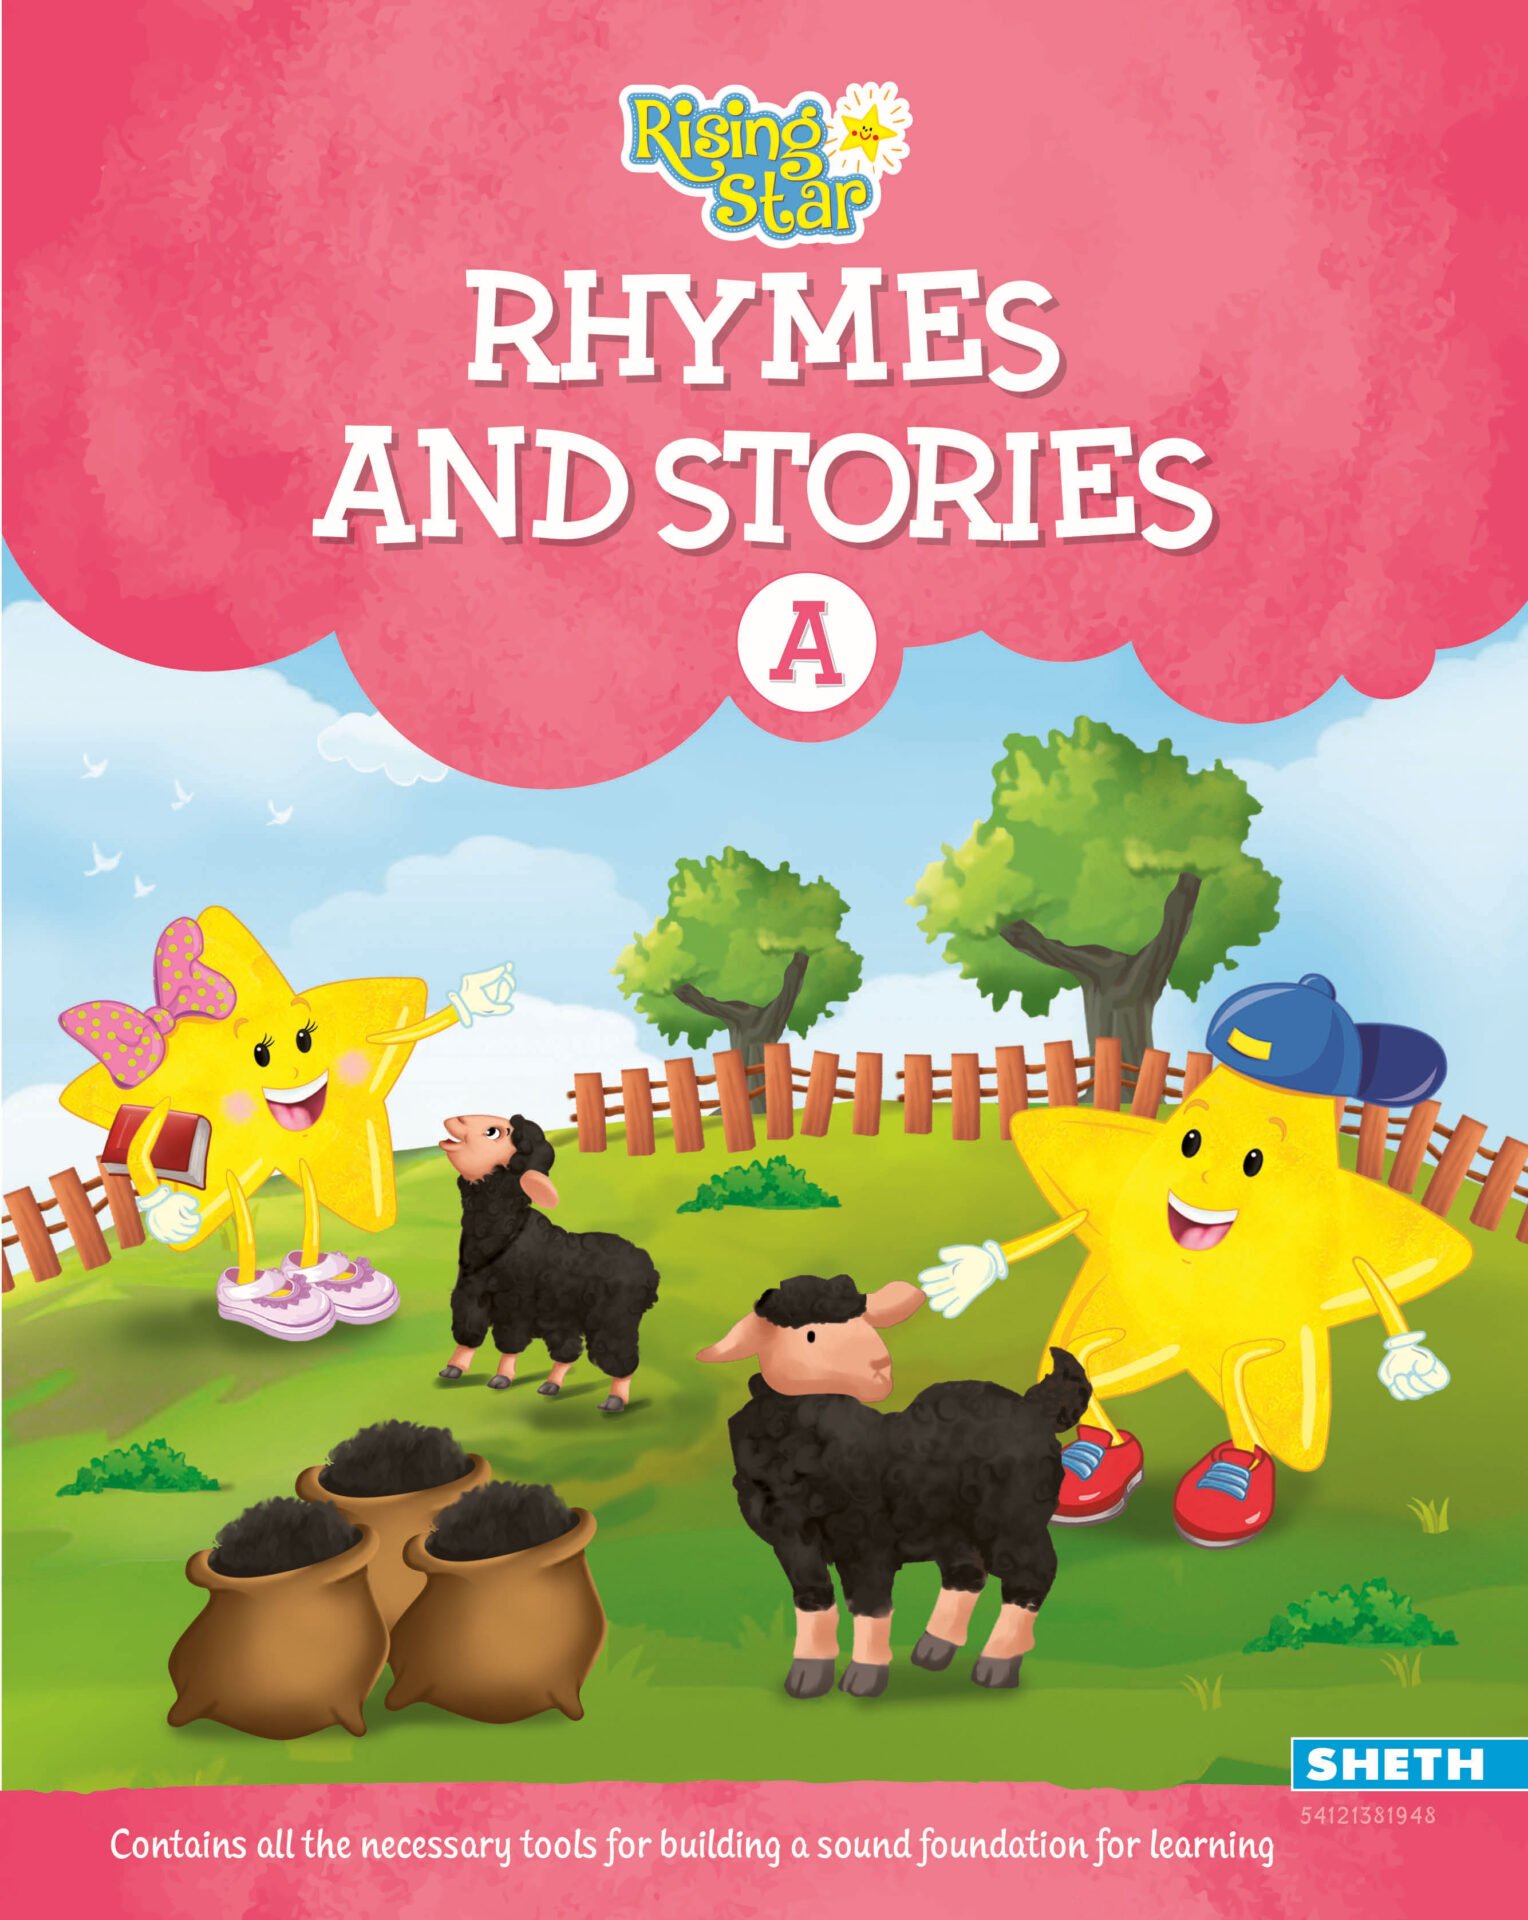 Rising Star Rhymes and Stories A 1 1